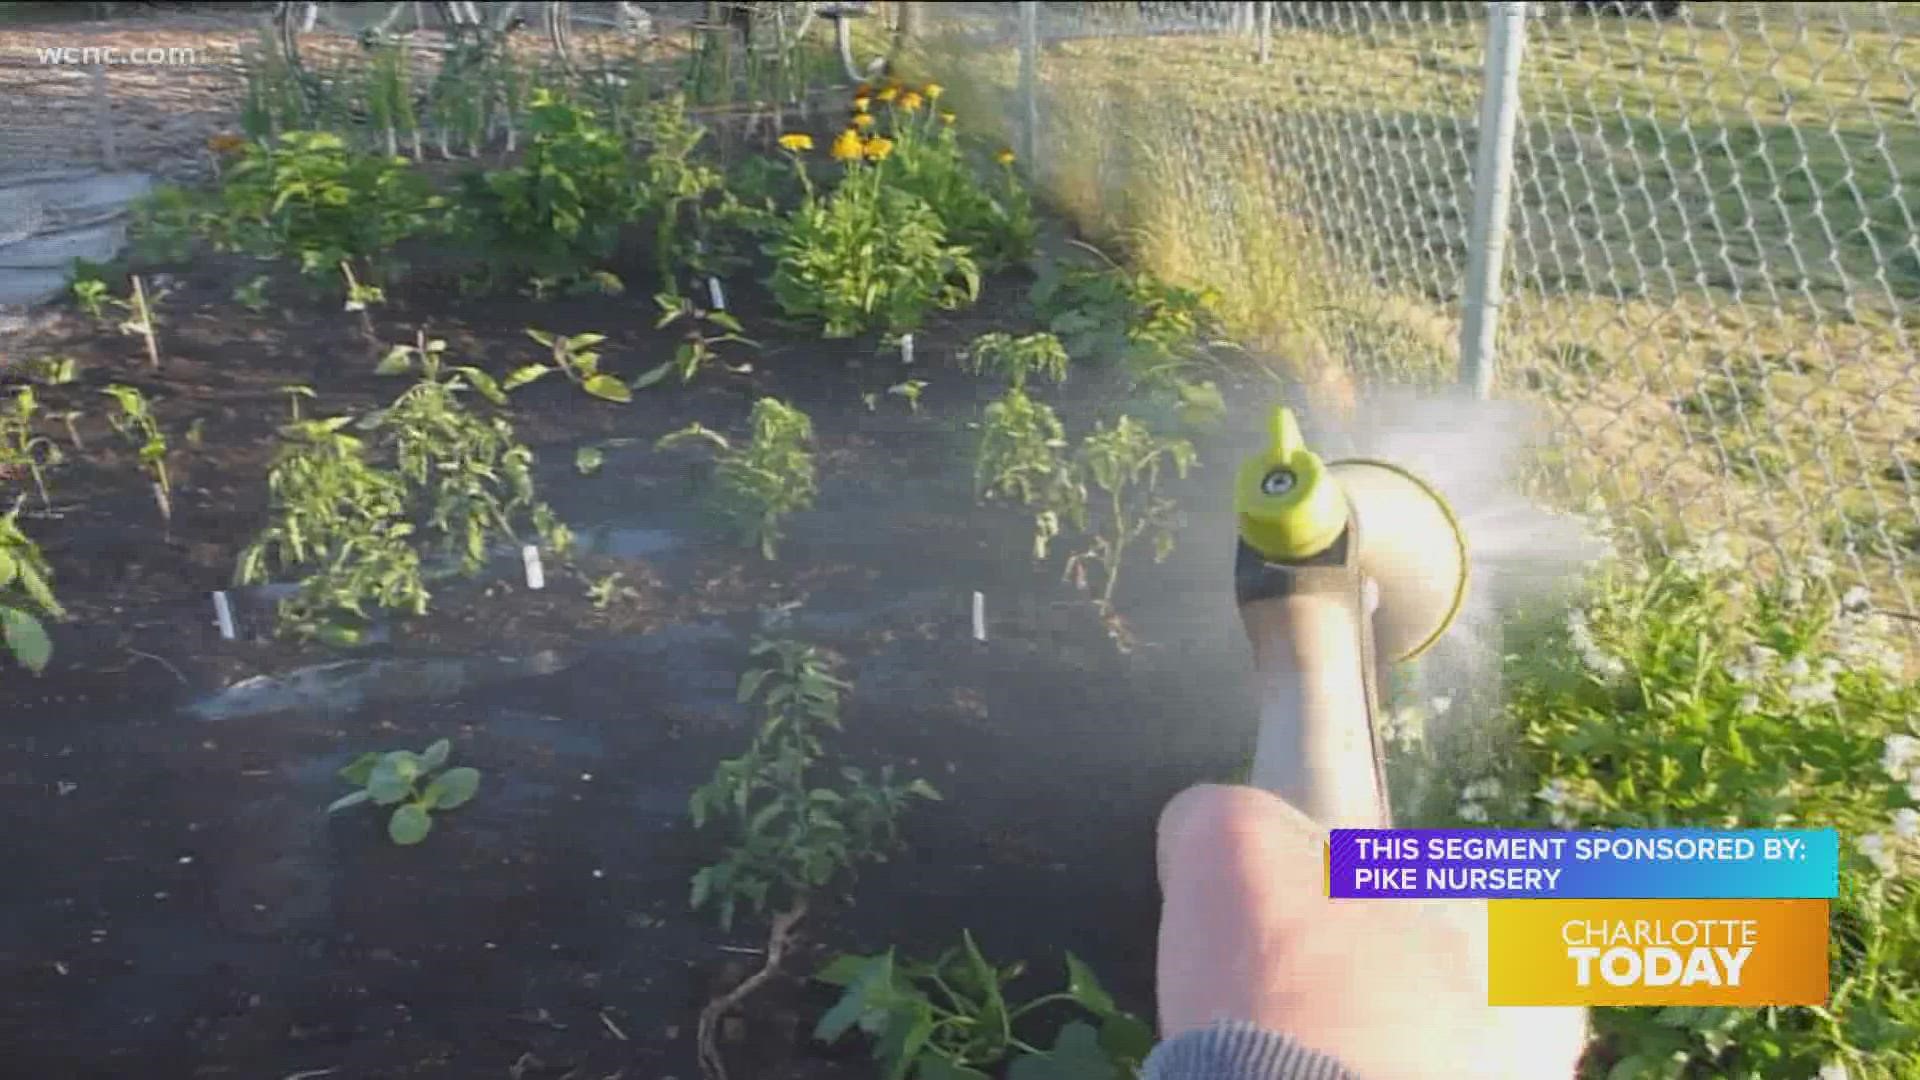 Pike Nursery will get your vegetable garden started off right